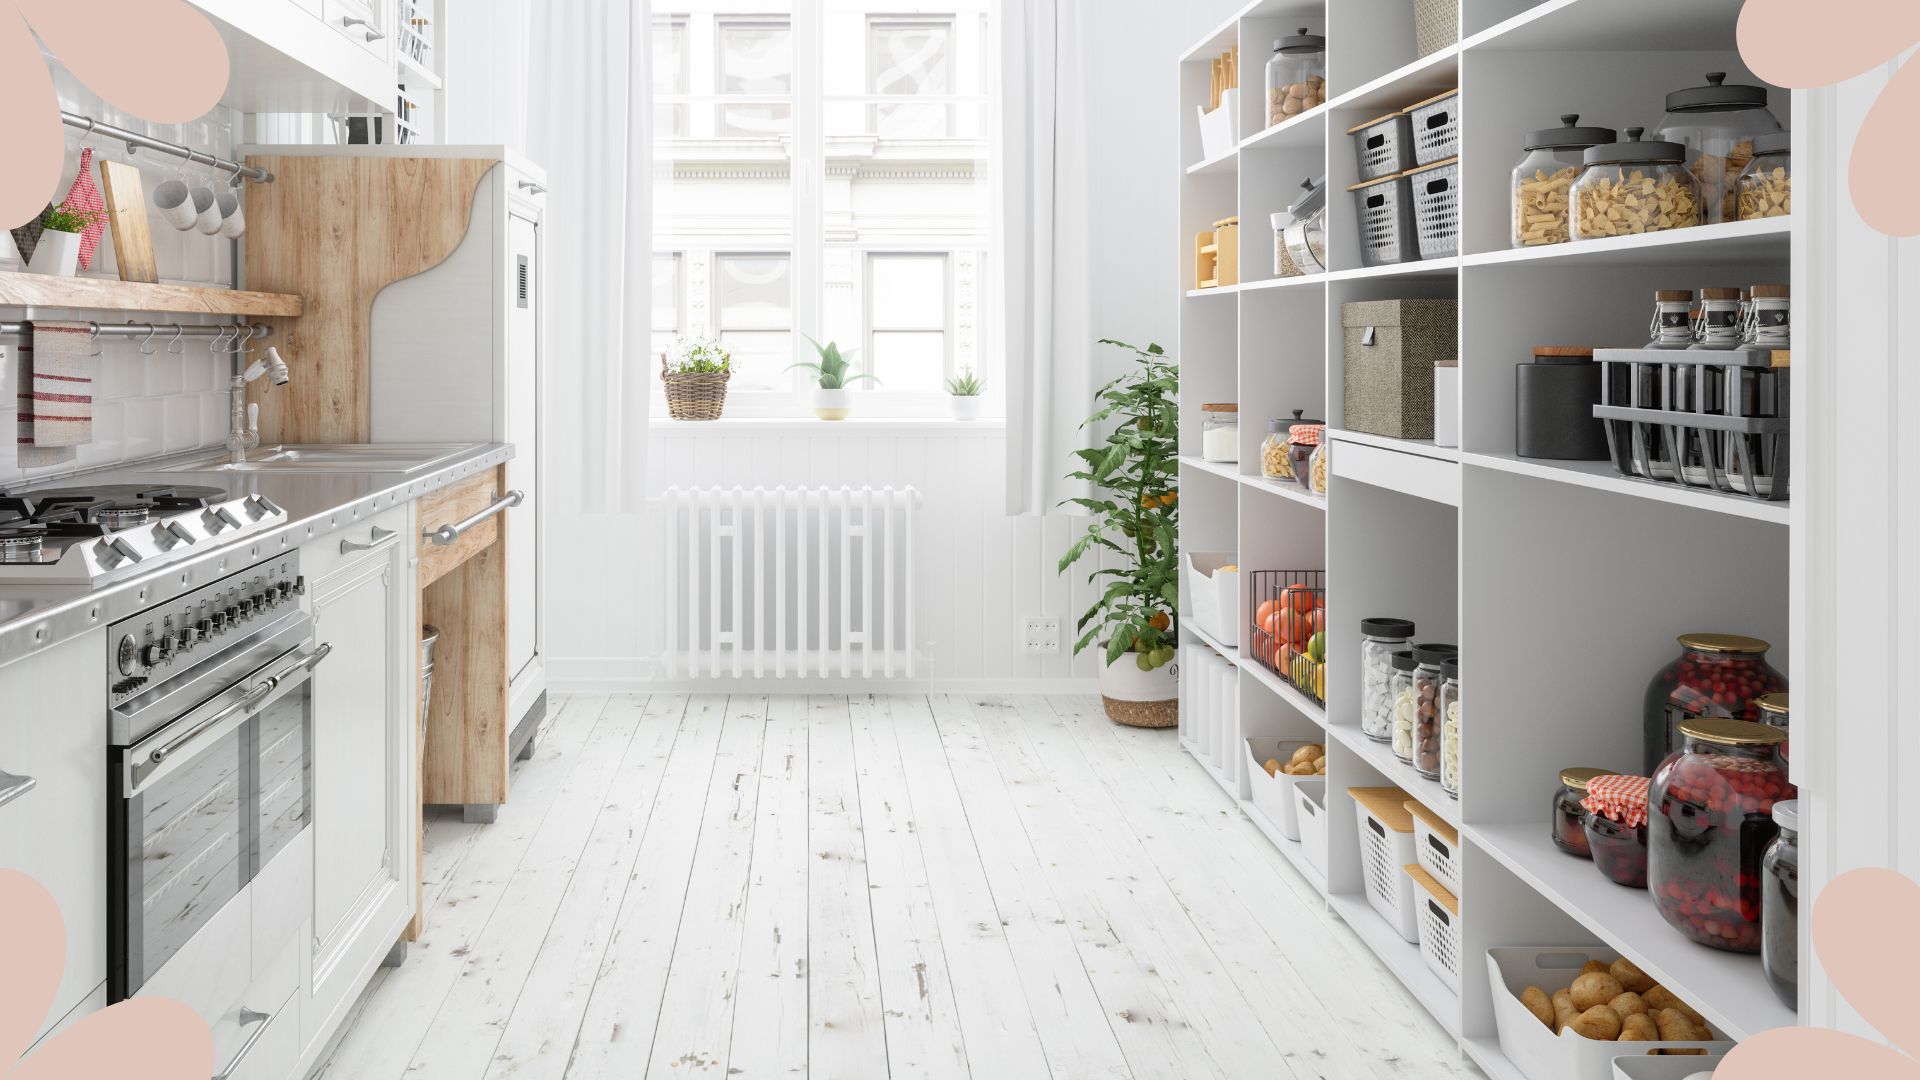 How to Organize Your Pantry and Keep It Tidy, According to Experts